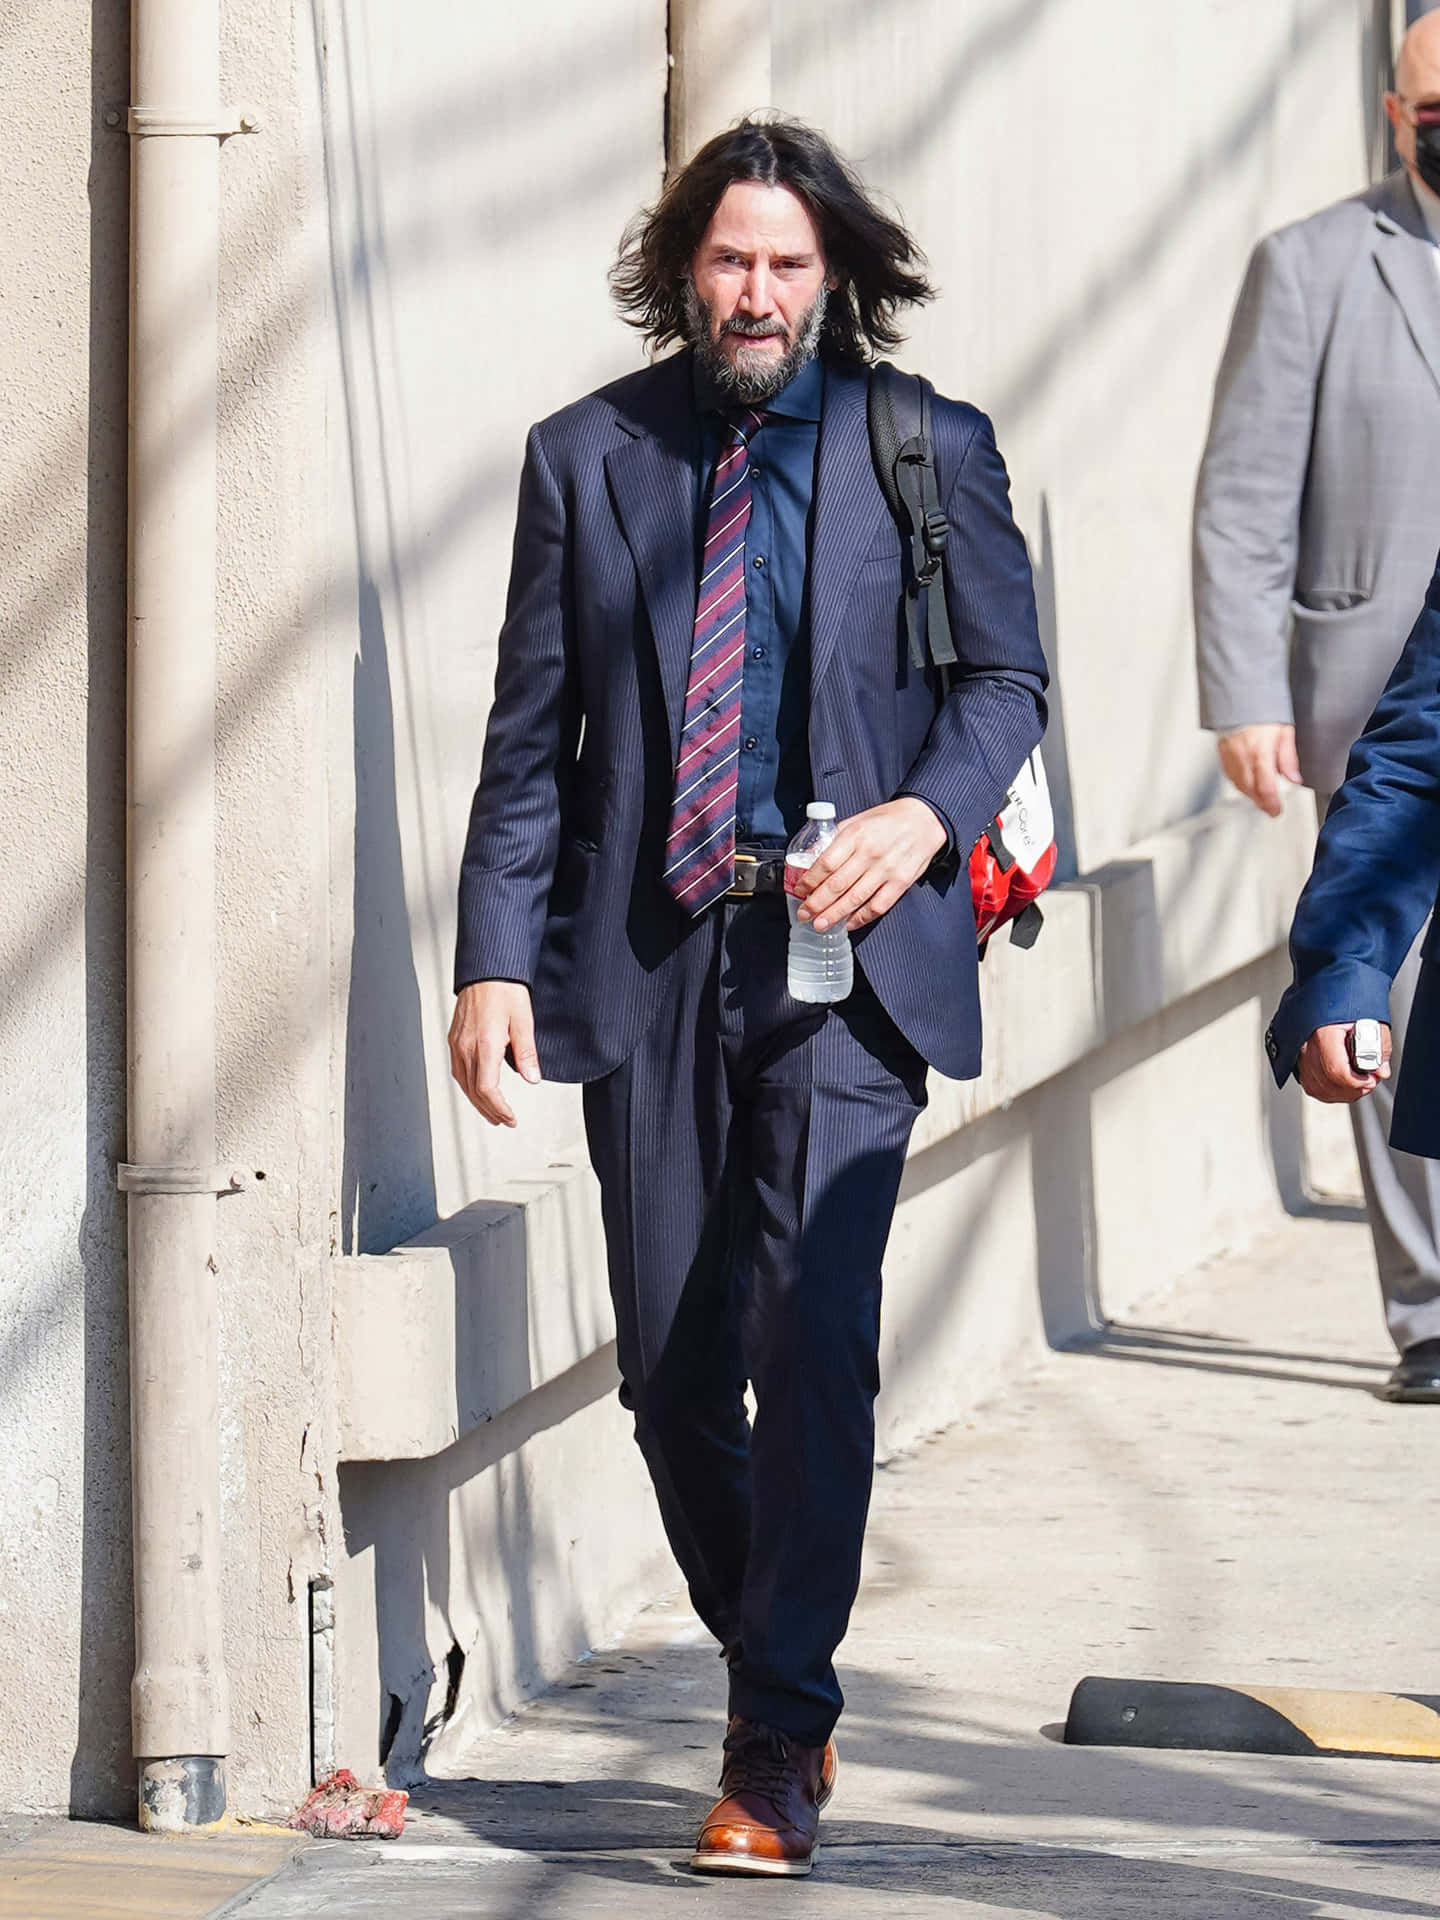 Keanu Reeves Posing in a Stylish Outfit